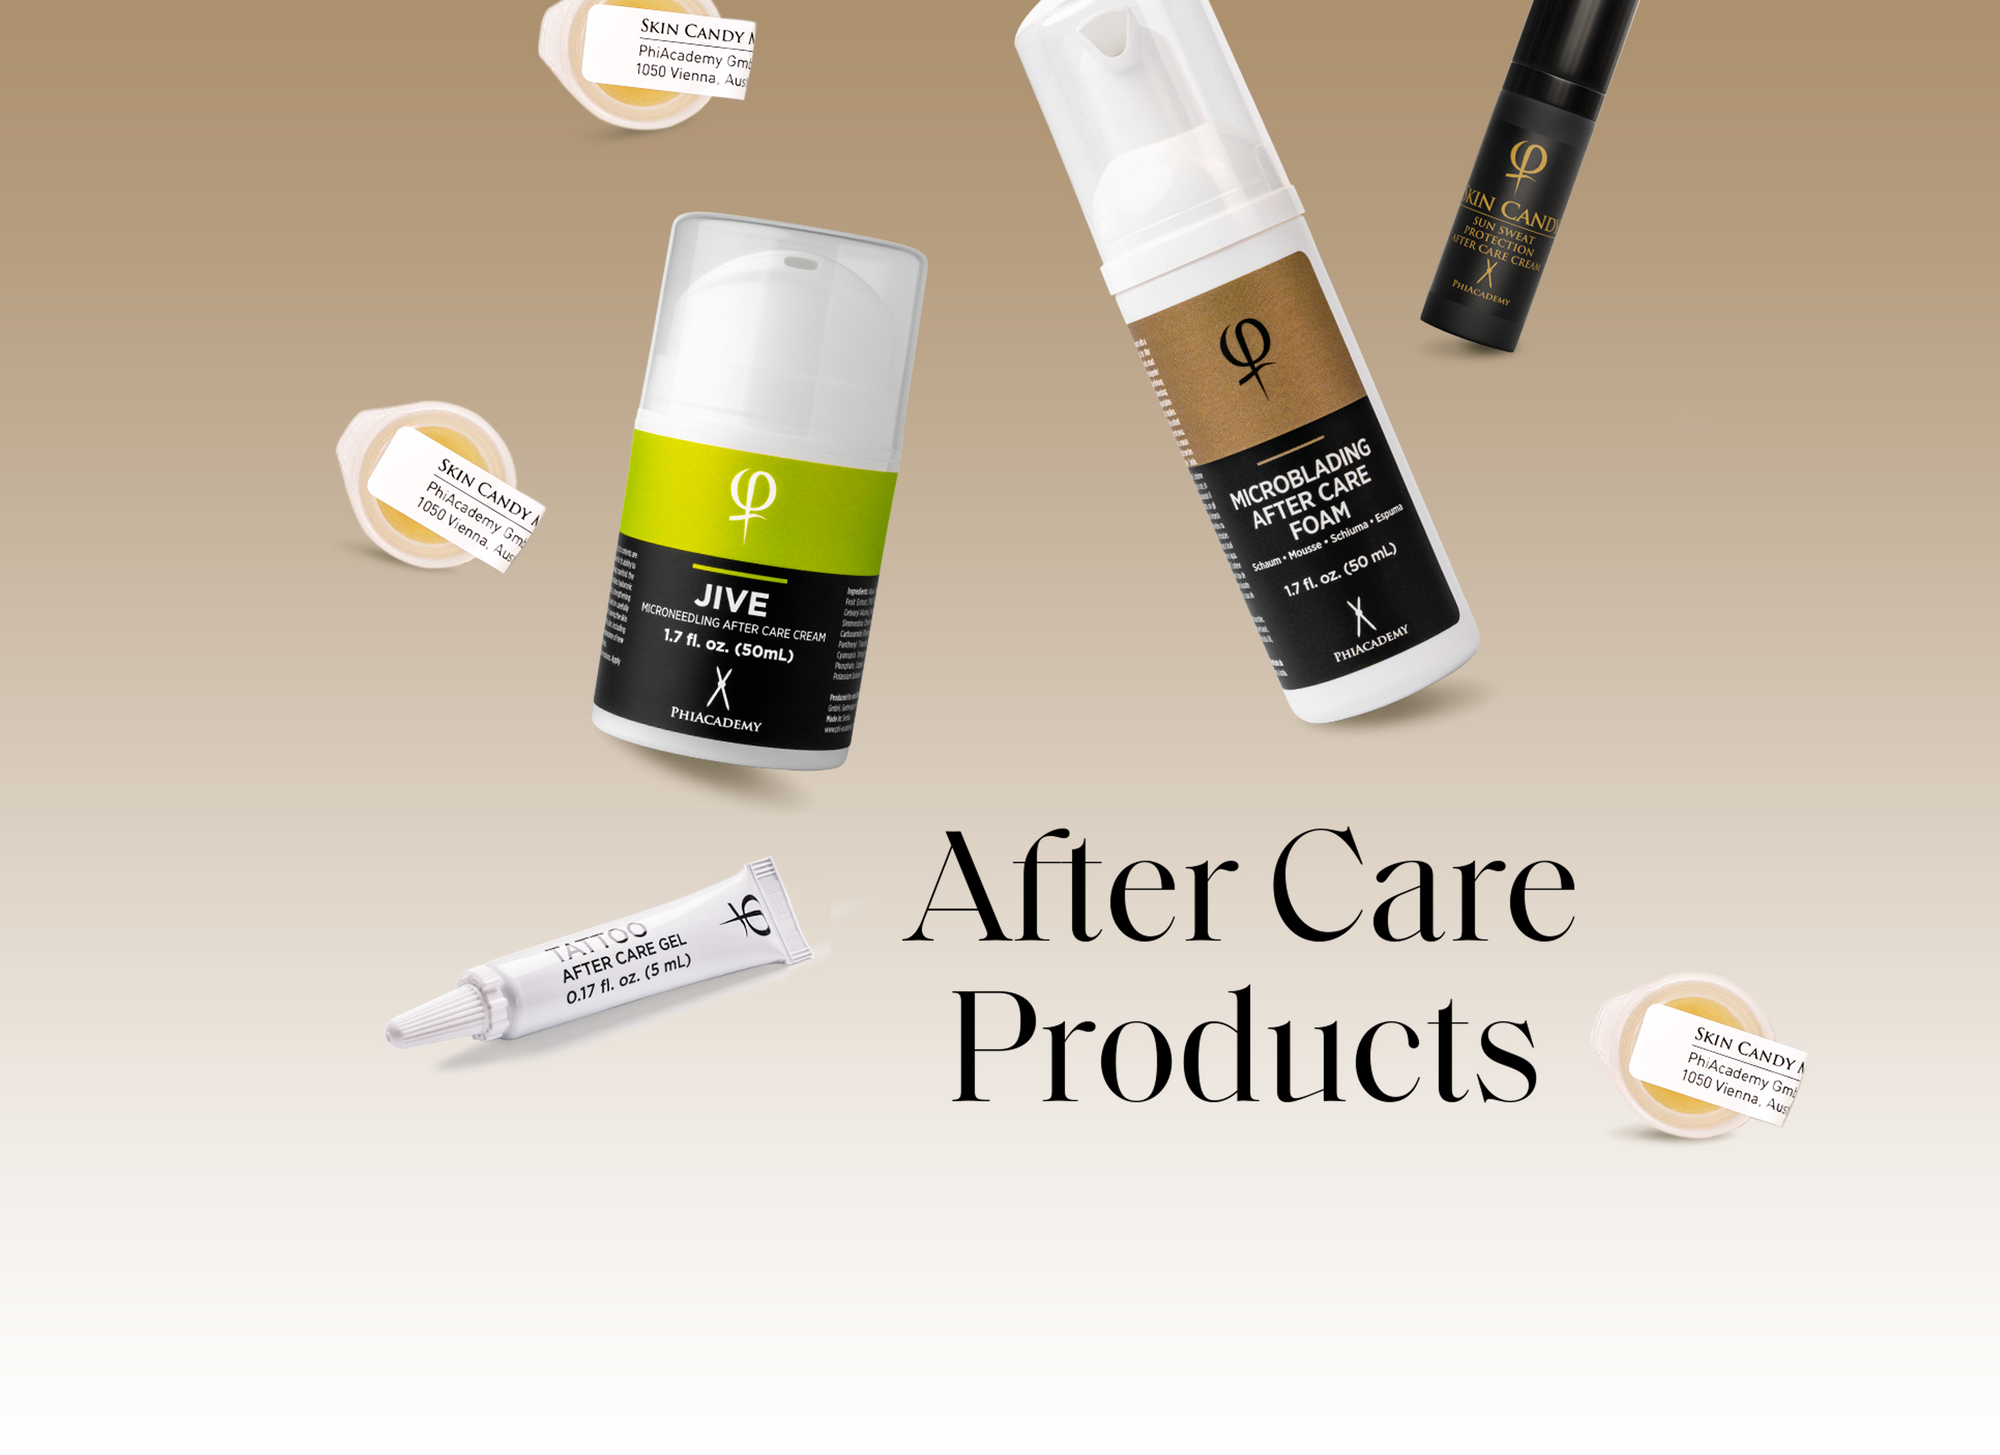 After Care Products